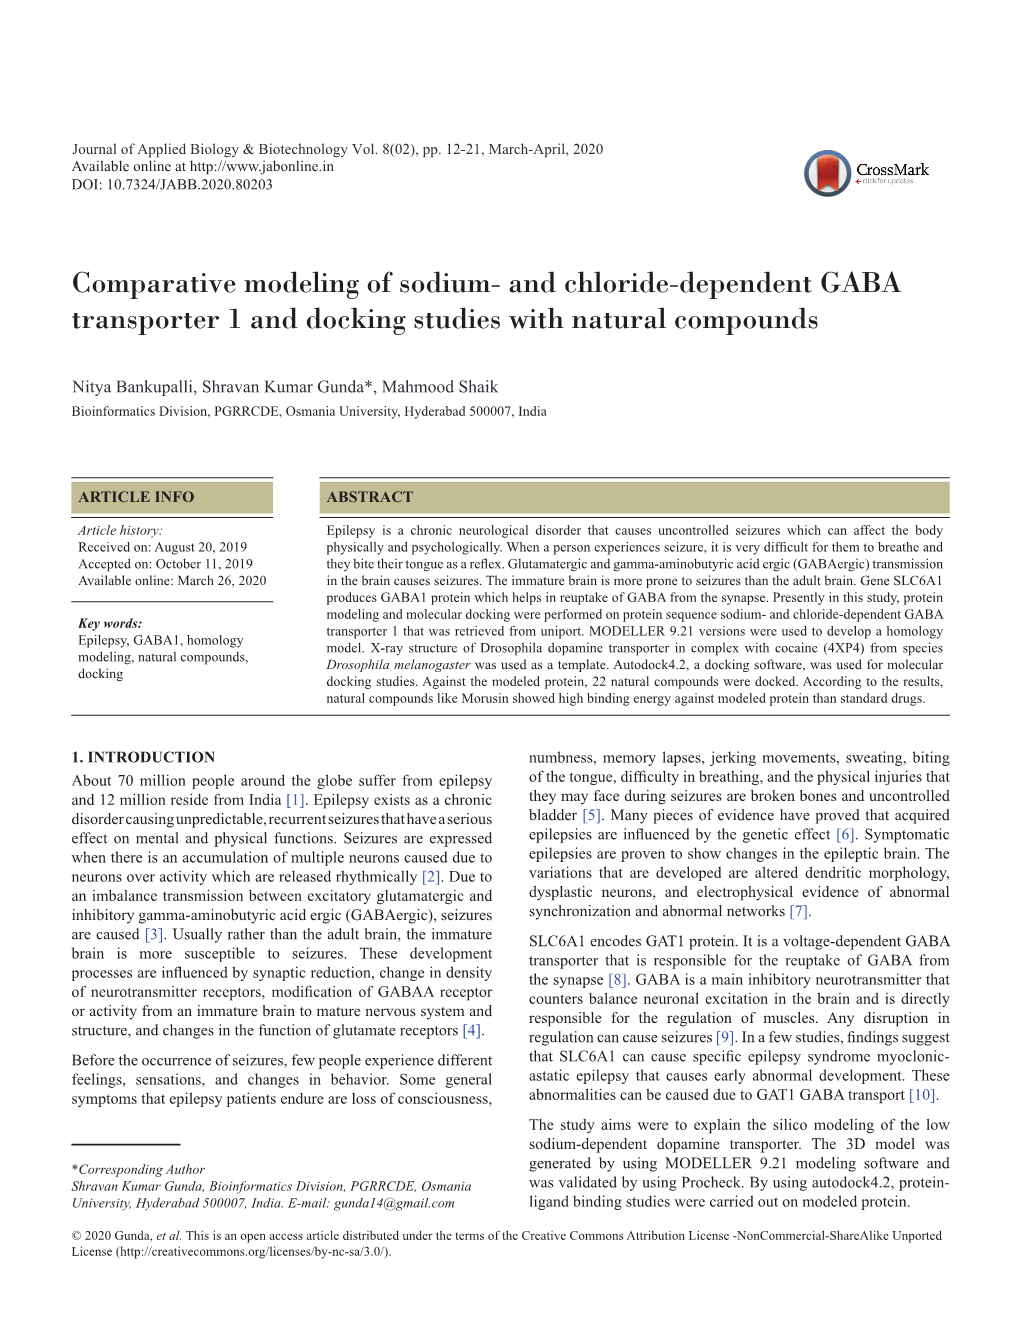 And Chloride-Dependent GABA Transporter 1 and Docking Studies with Natural Compounds